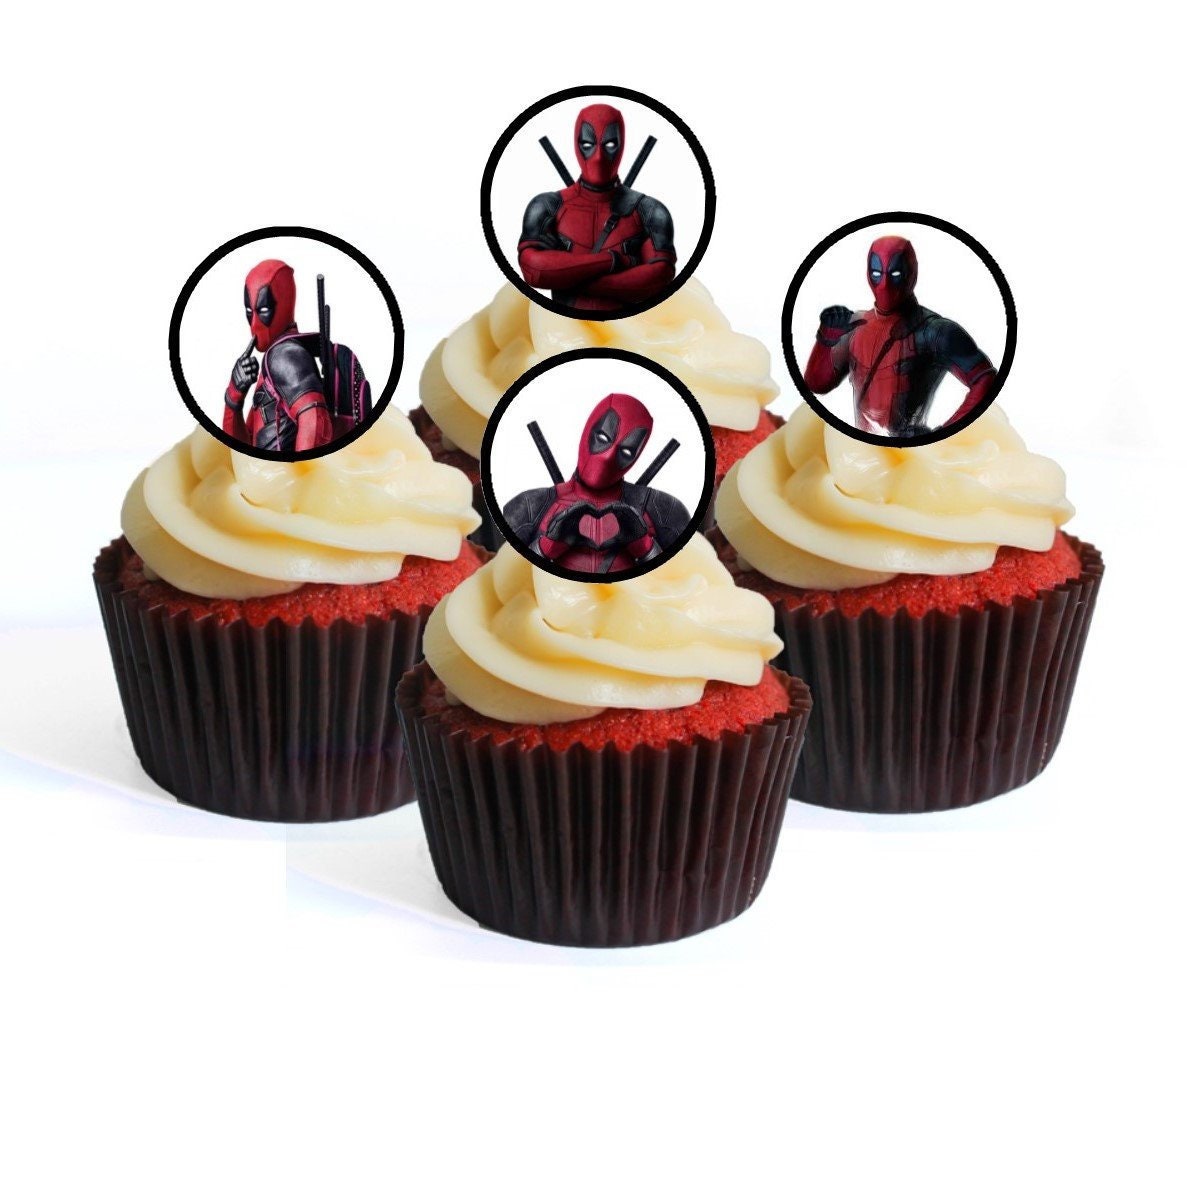 Deadpool edible Cake & Cupcake toppers  image Fast shipping!!!! 